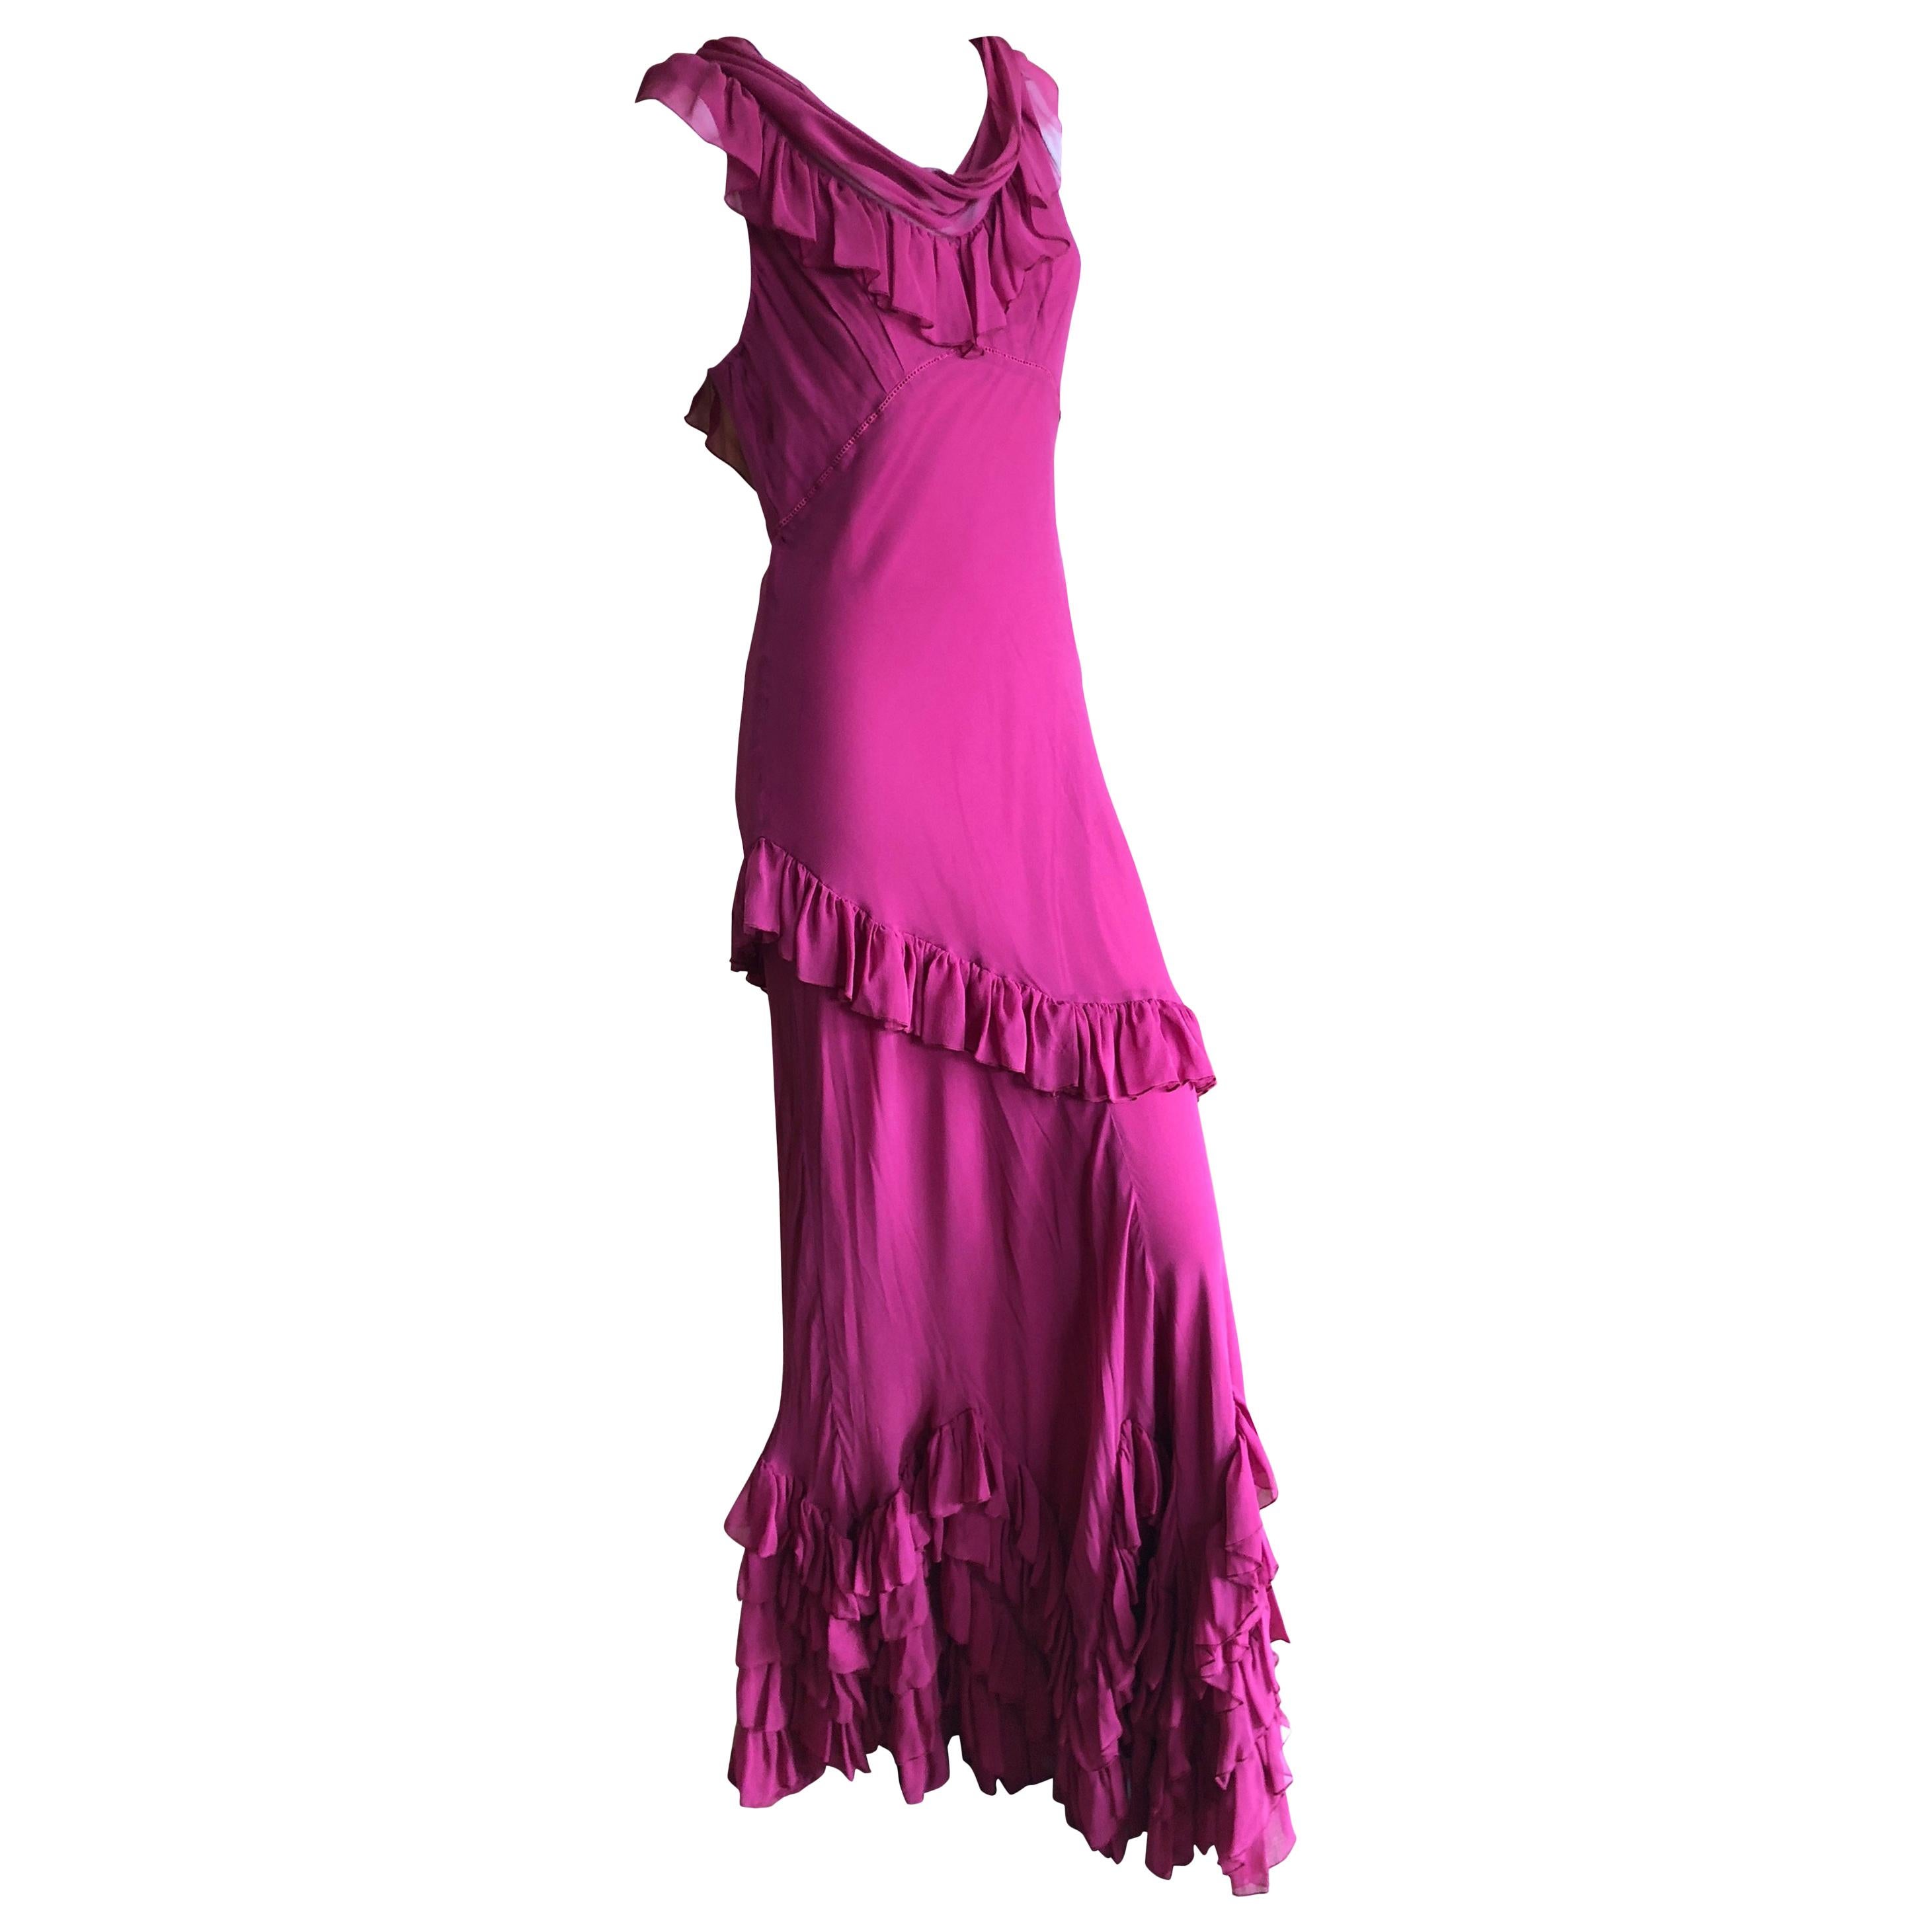 John Galliano Raspberry Sheer Vintage Silk Ruffled Evening Dress with Cowl Back  For Sale